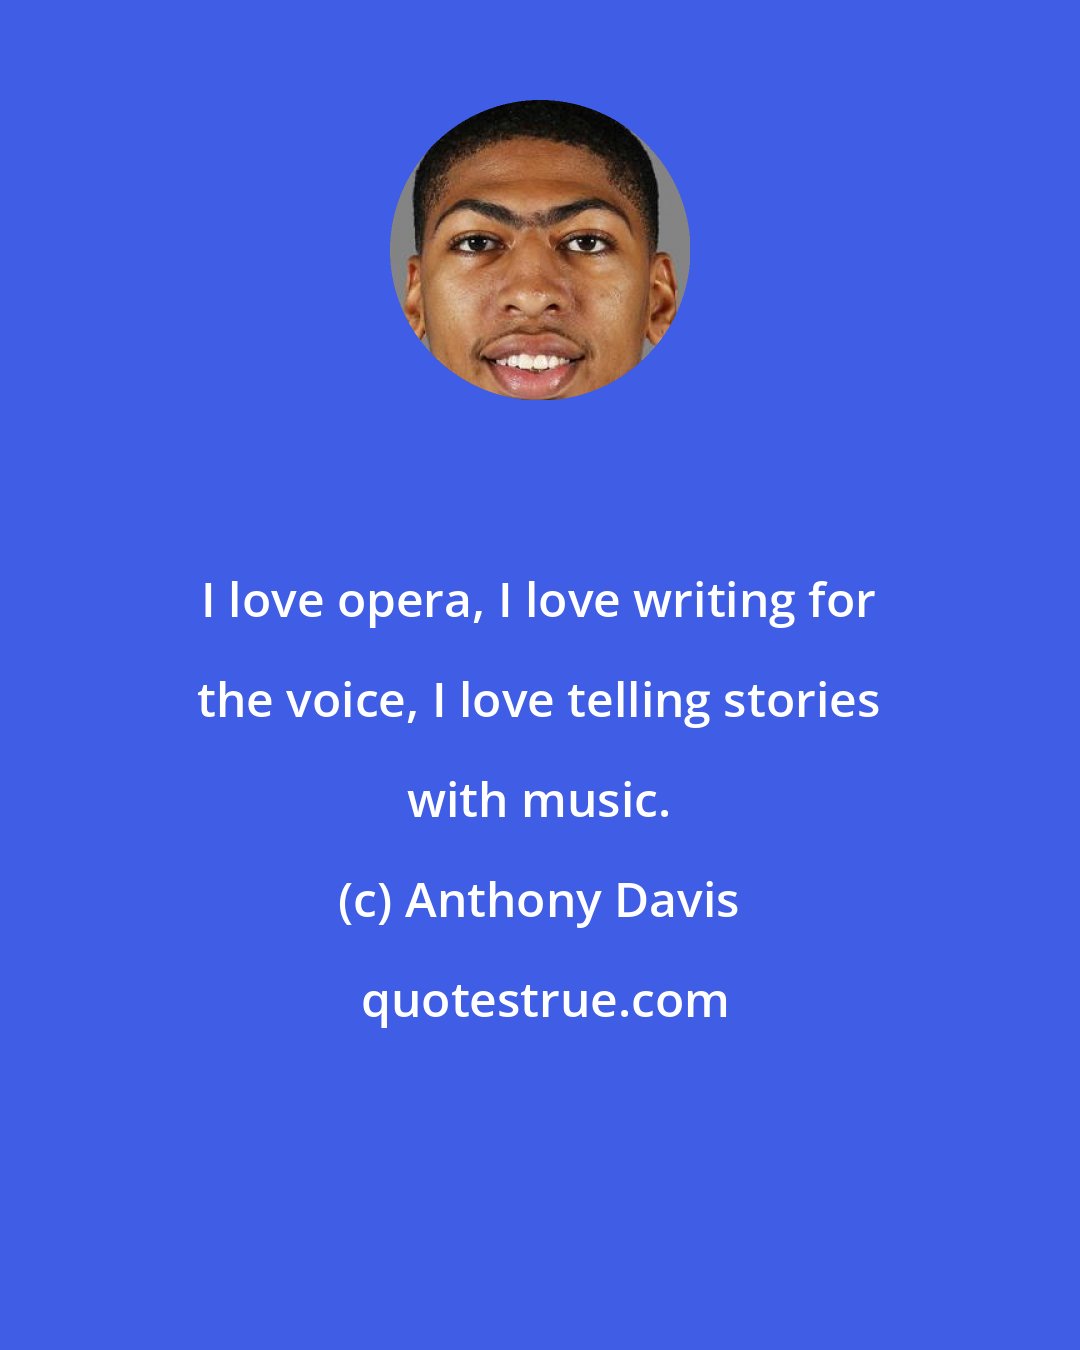 Anthony Davis: I love opera, I love writing for the voice, I love telling stories with music.